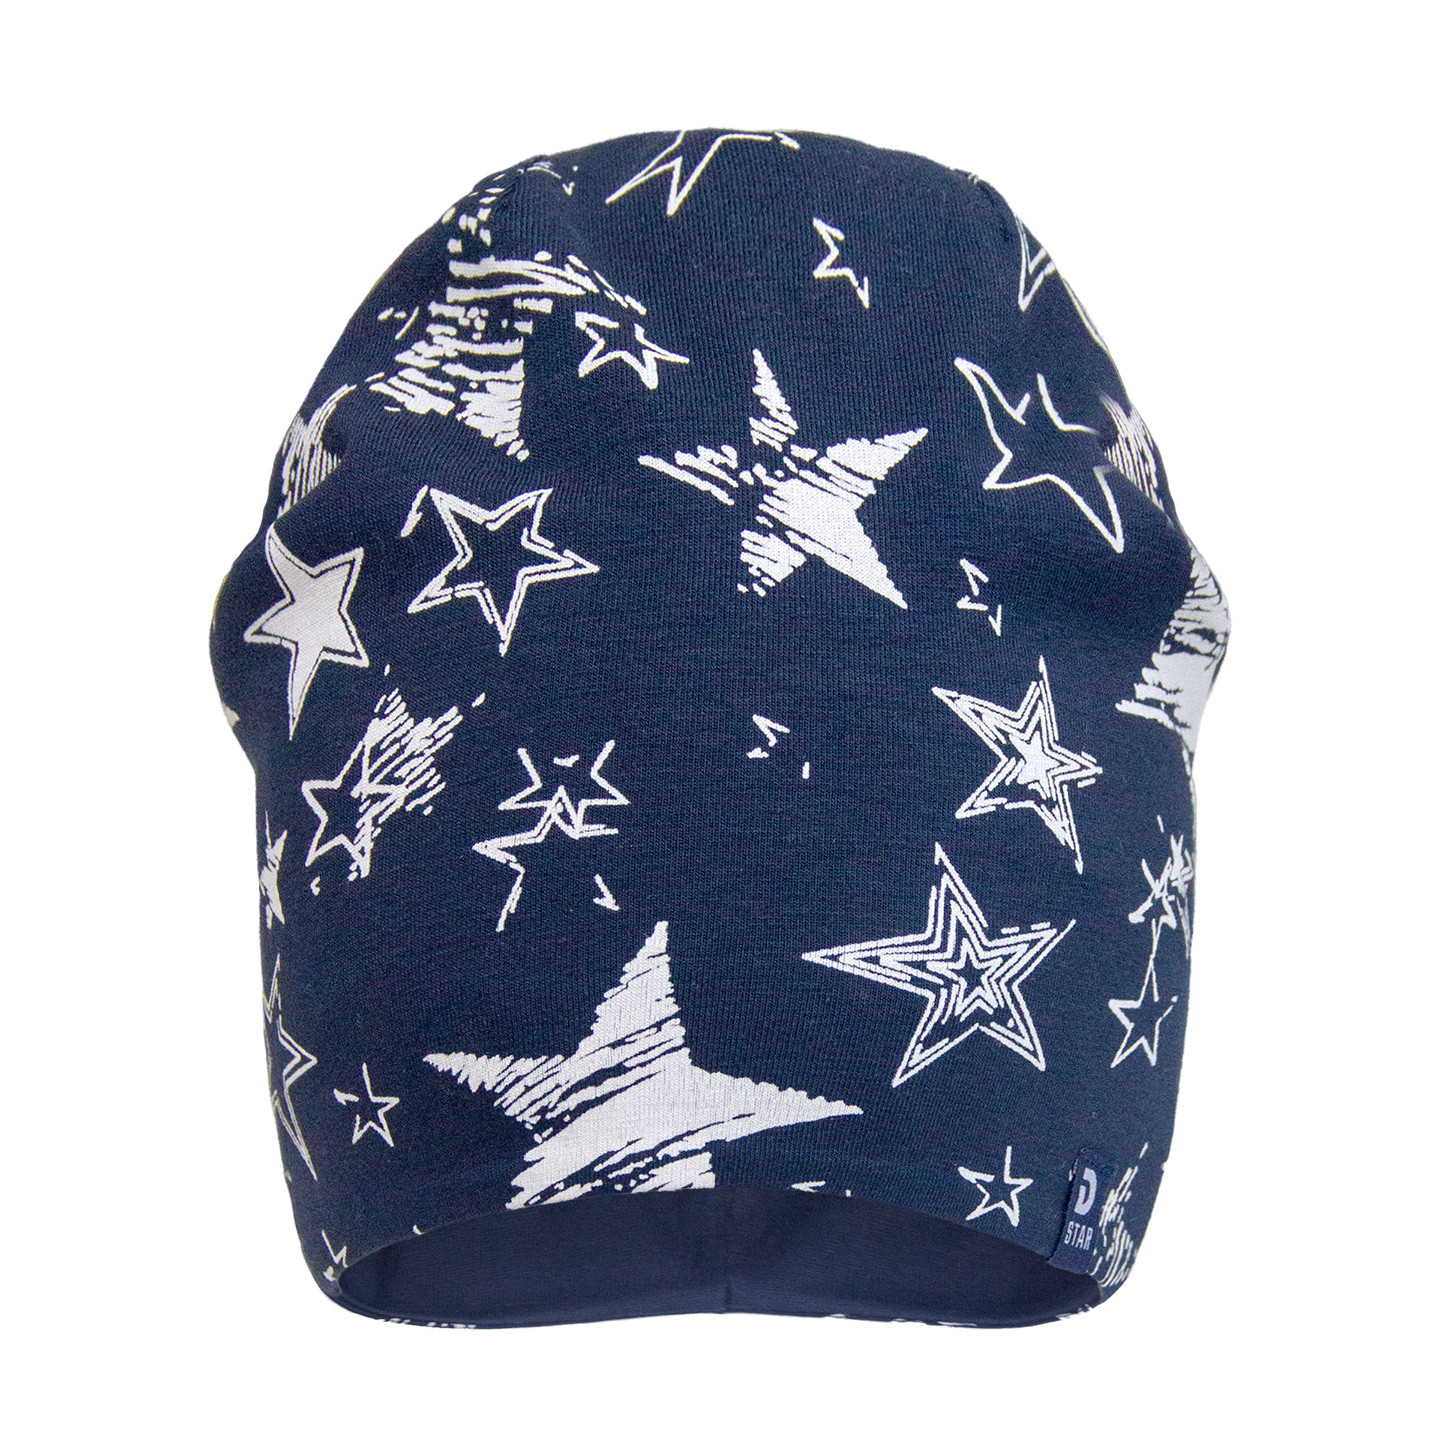 Cotton beanie for boy, 2132, 3 - 13 years